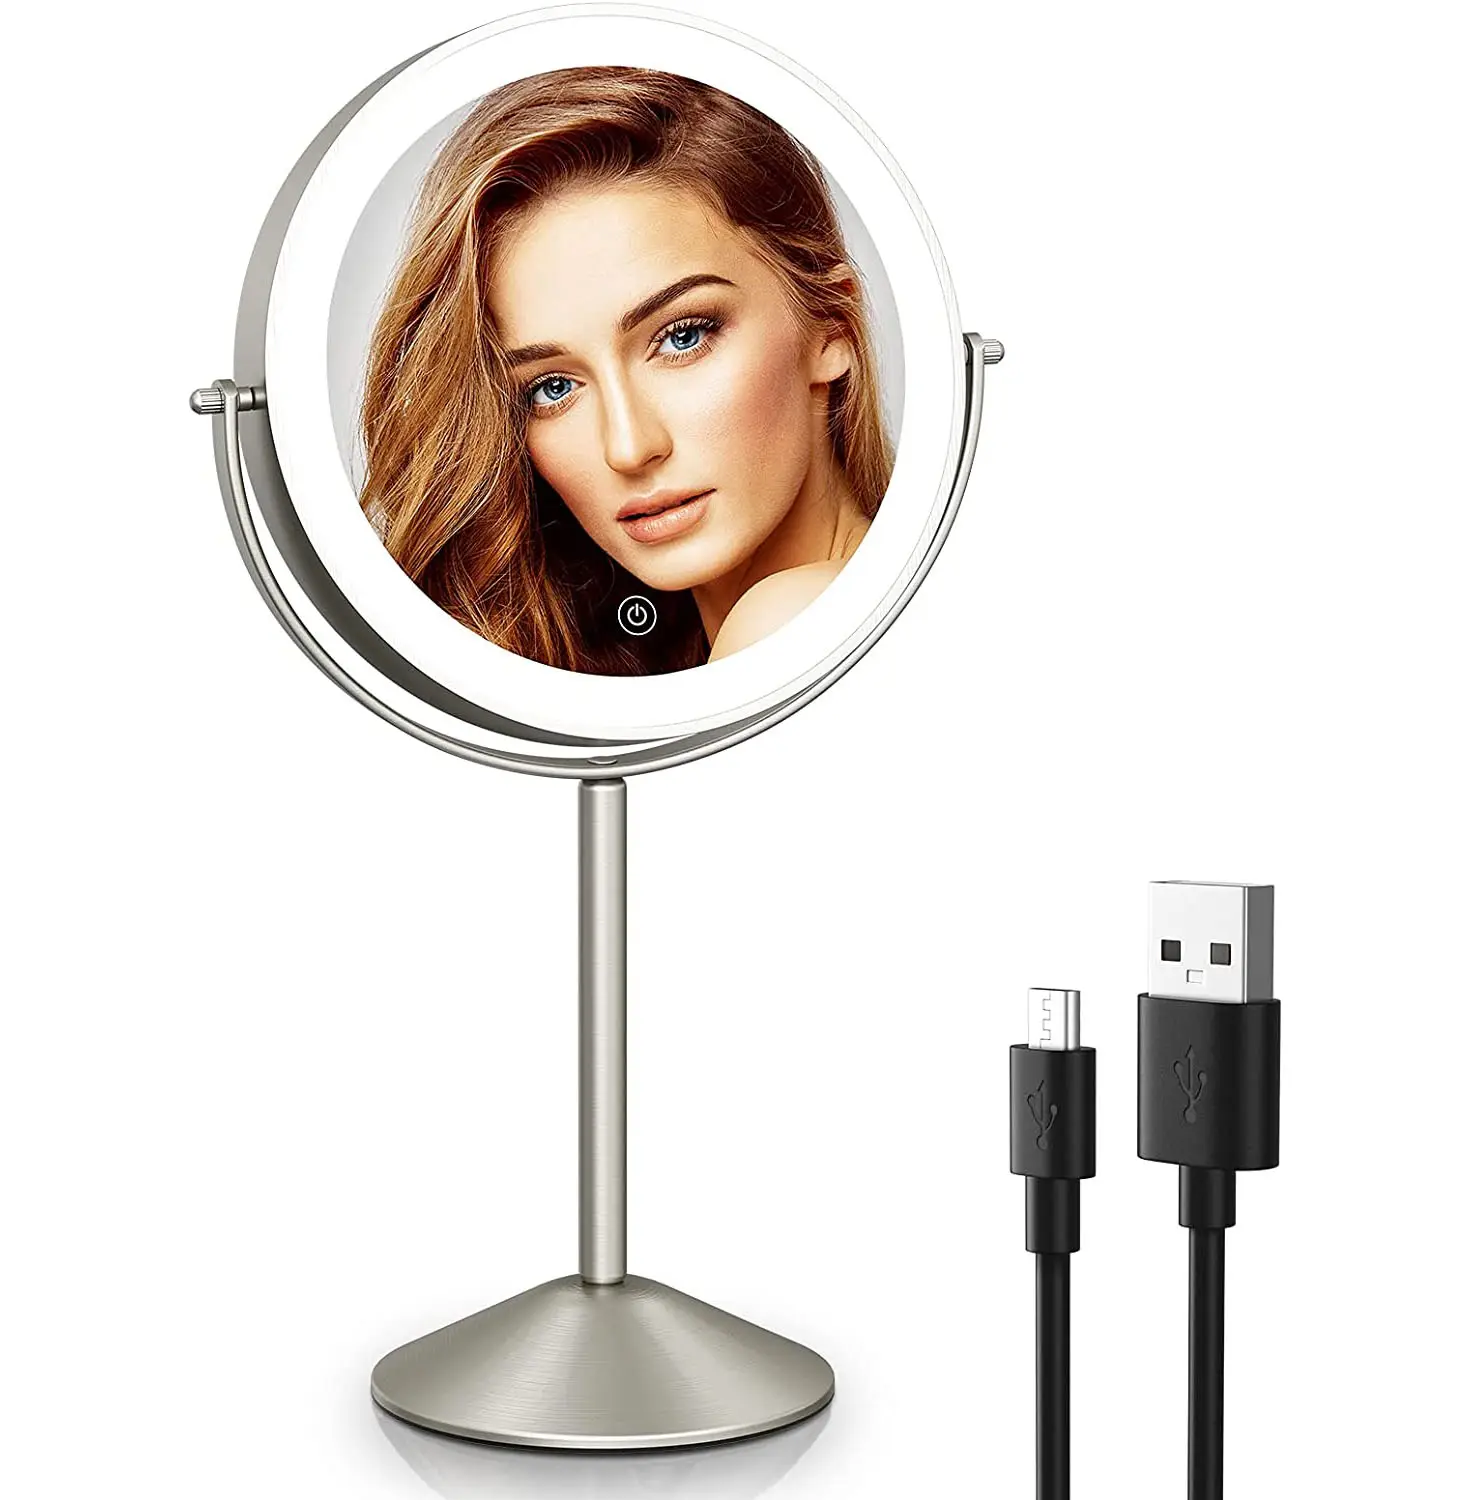 Brushed Nickel Finish Dimmable Cosmetic Mirror with Touch Control 360 Degree Rotation Led Light up Mirror